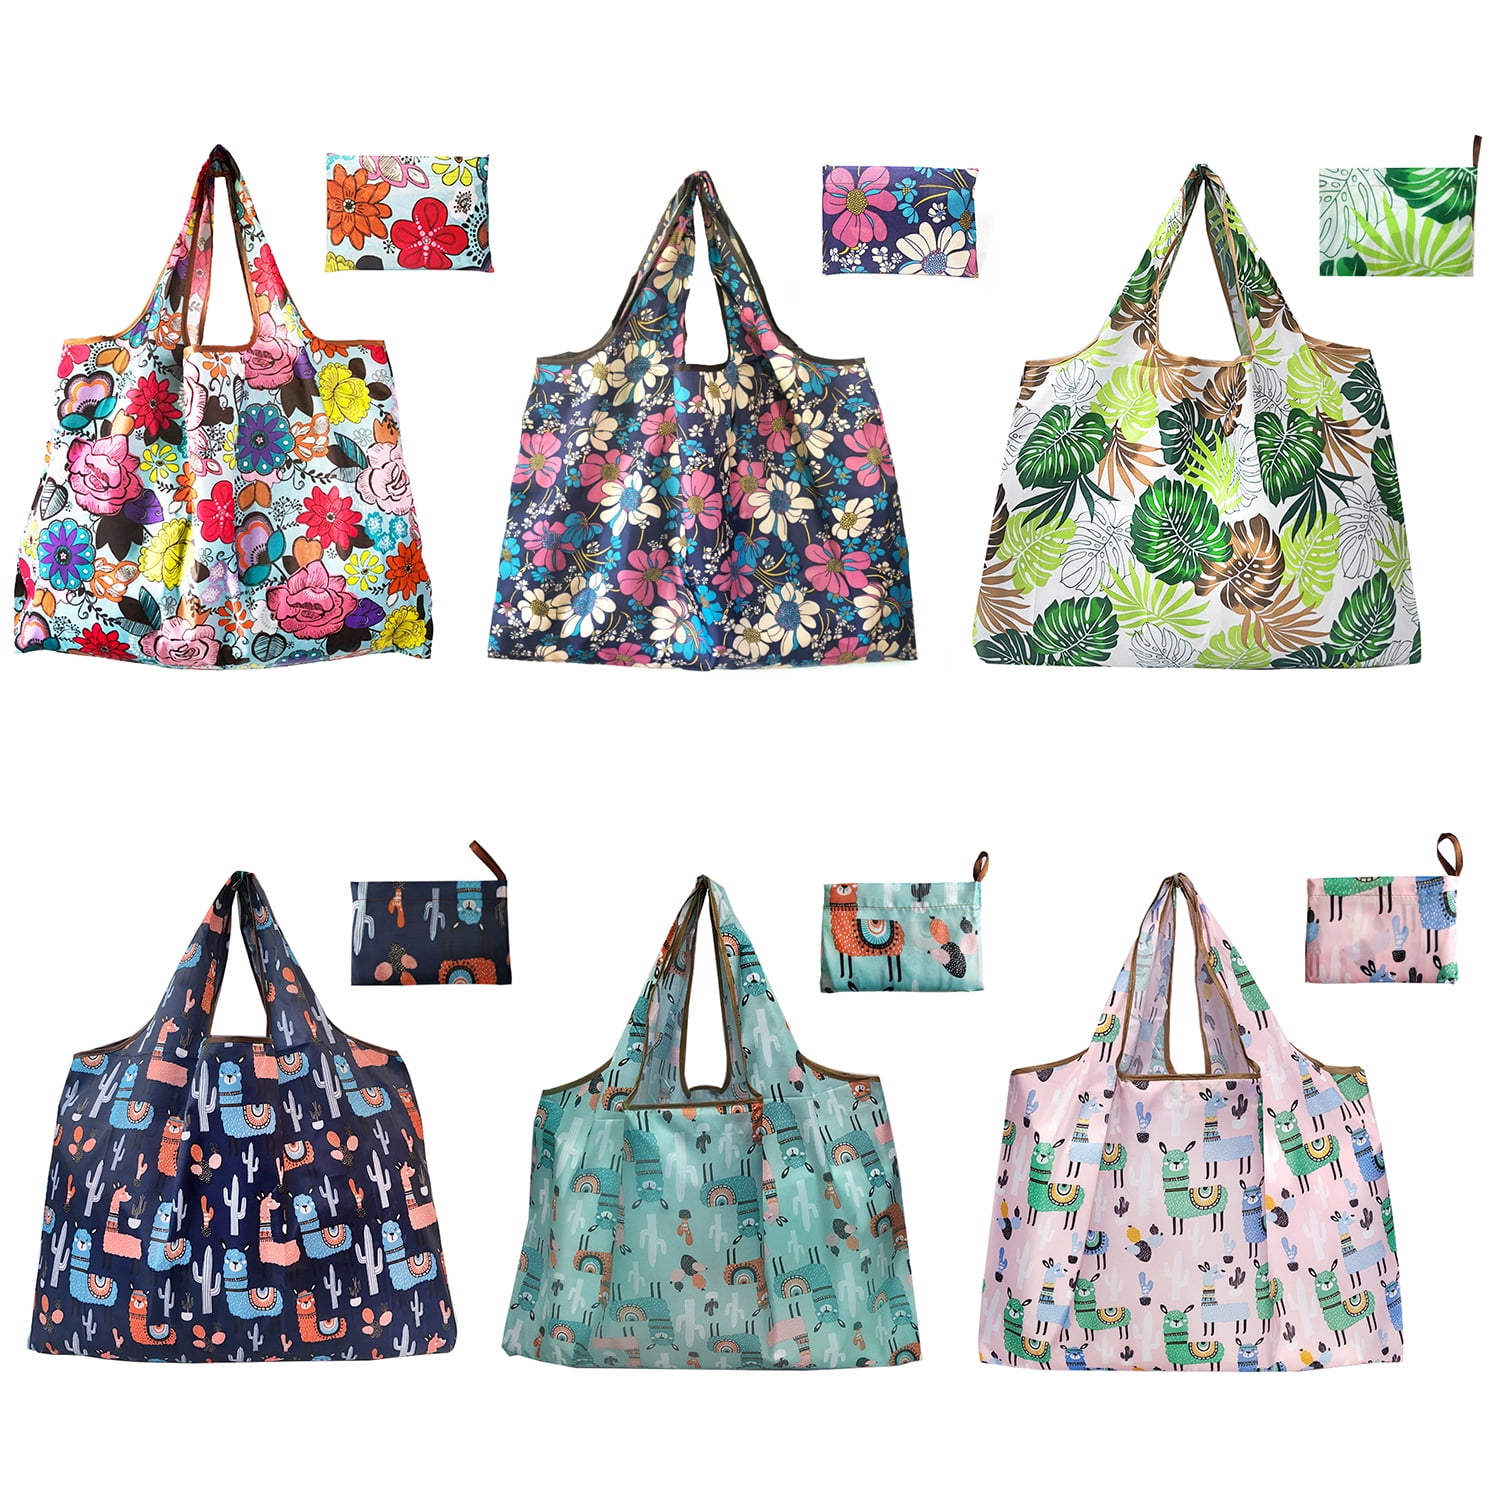 Reusable Grocery Shopping Bags with Pouch 6 Pack Foldable Shopping